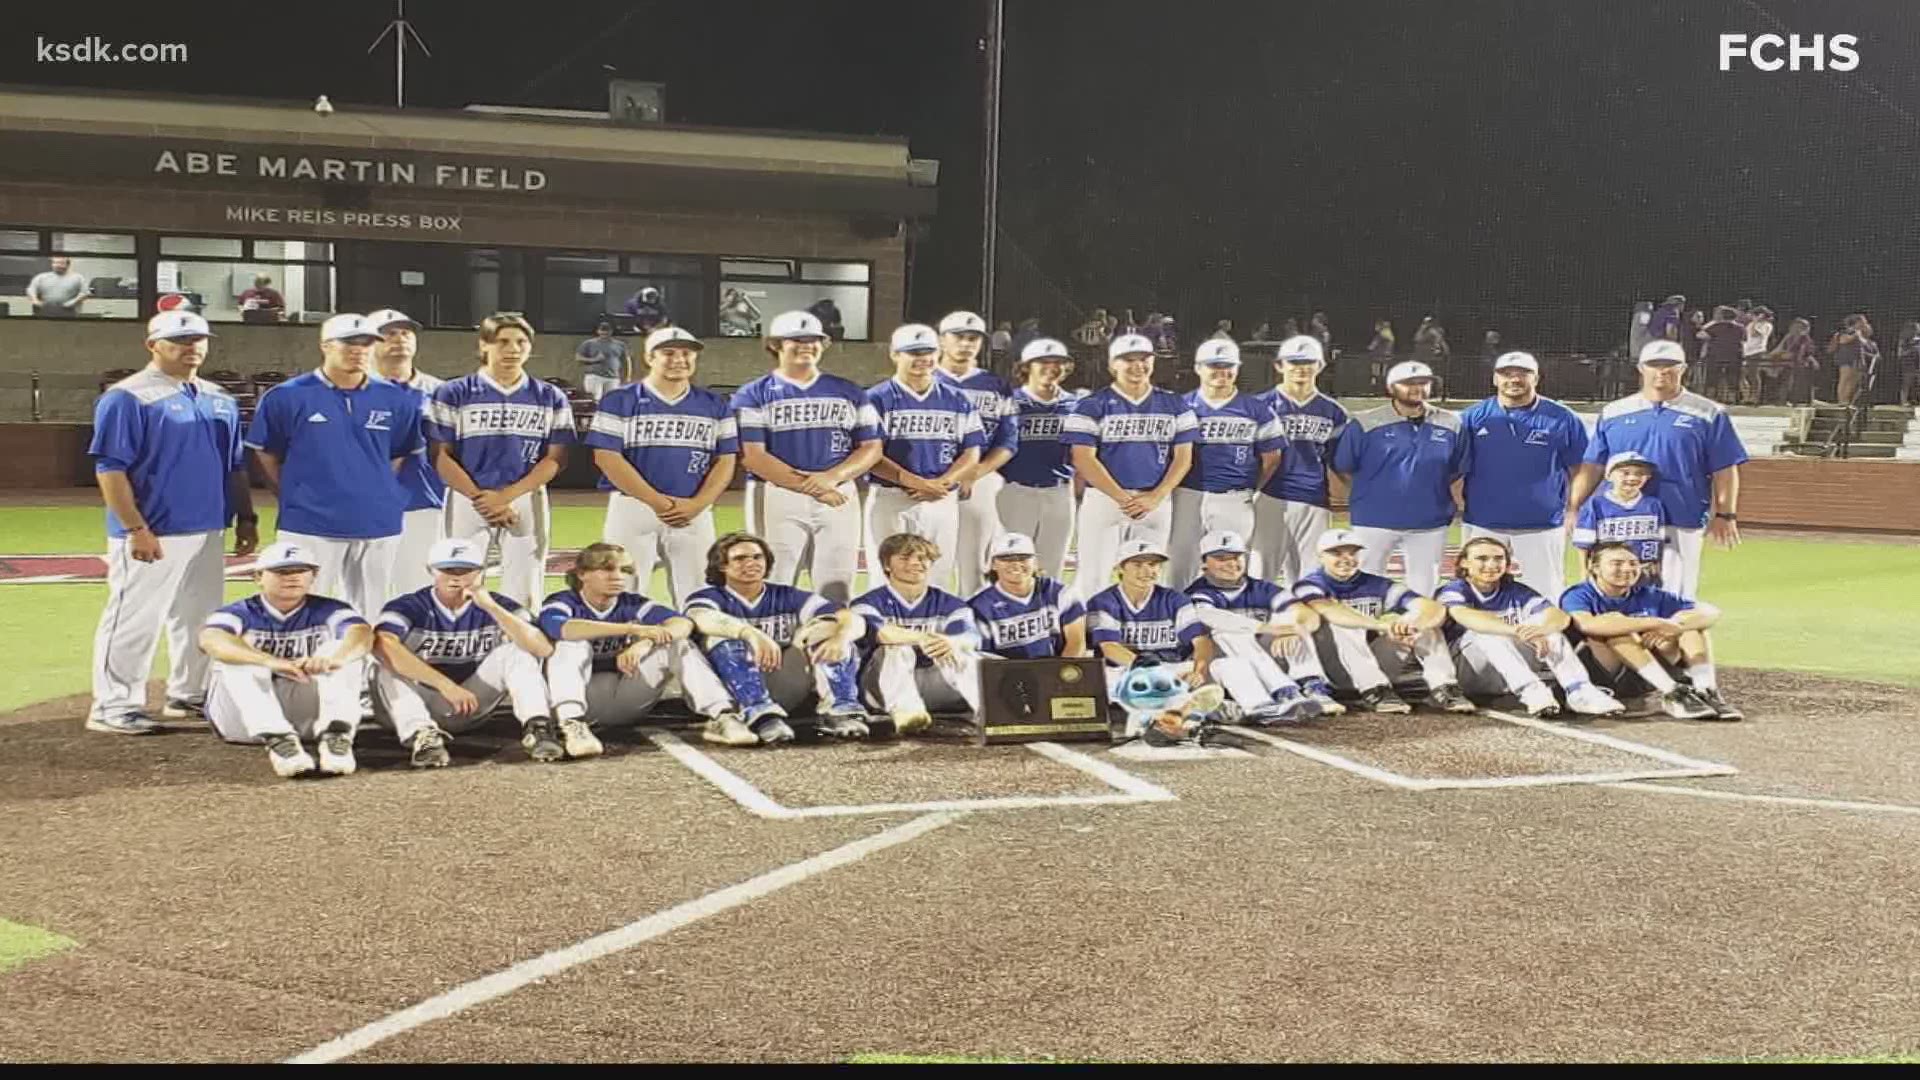 Led by an offense averaging close to nine runs a game, Freeburg baseball is heading to the state Final Four looking to bring home a championship